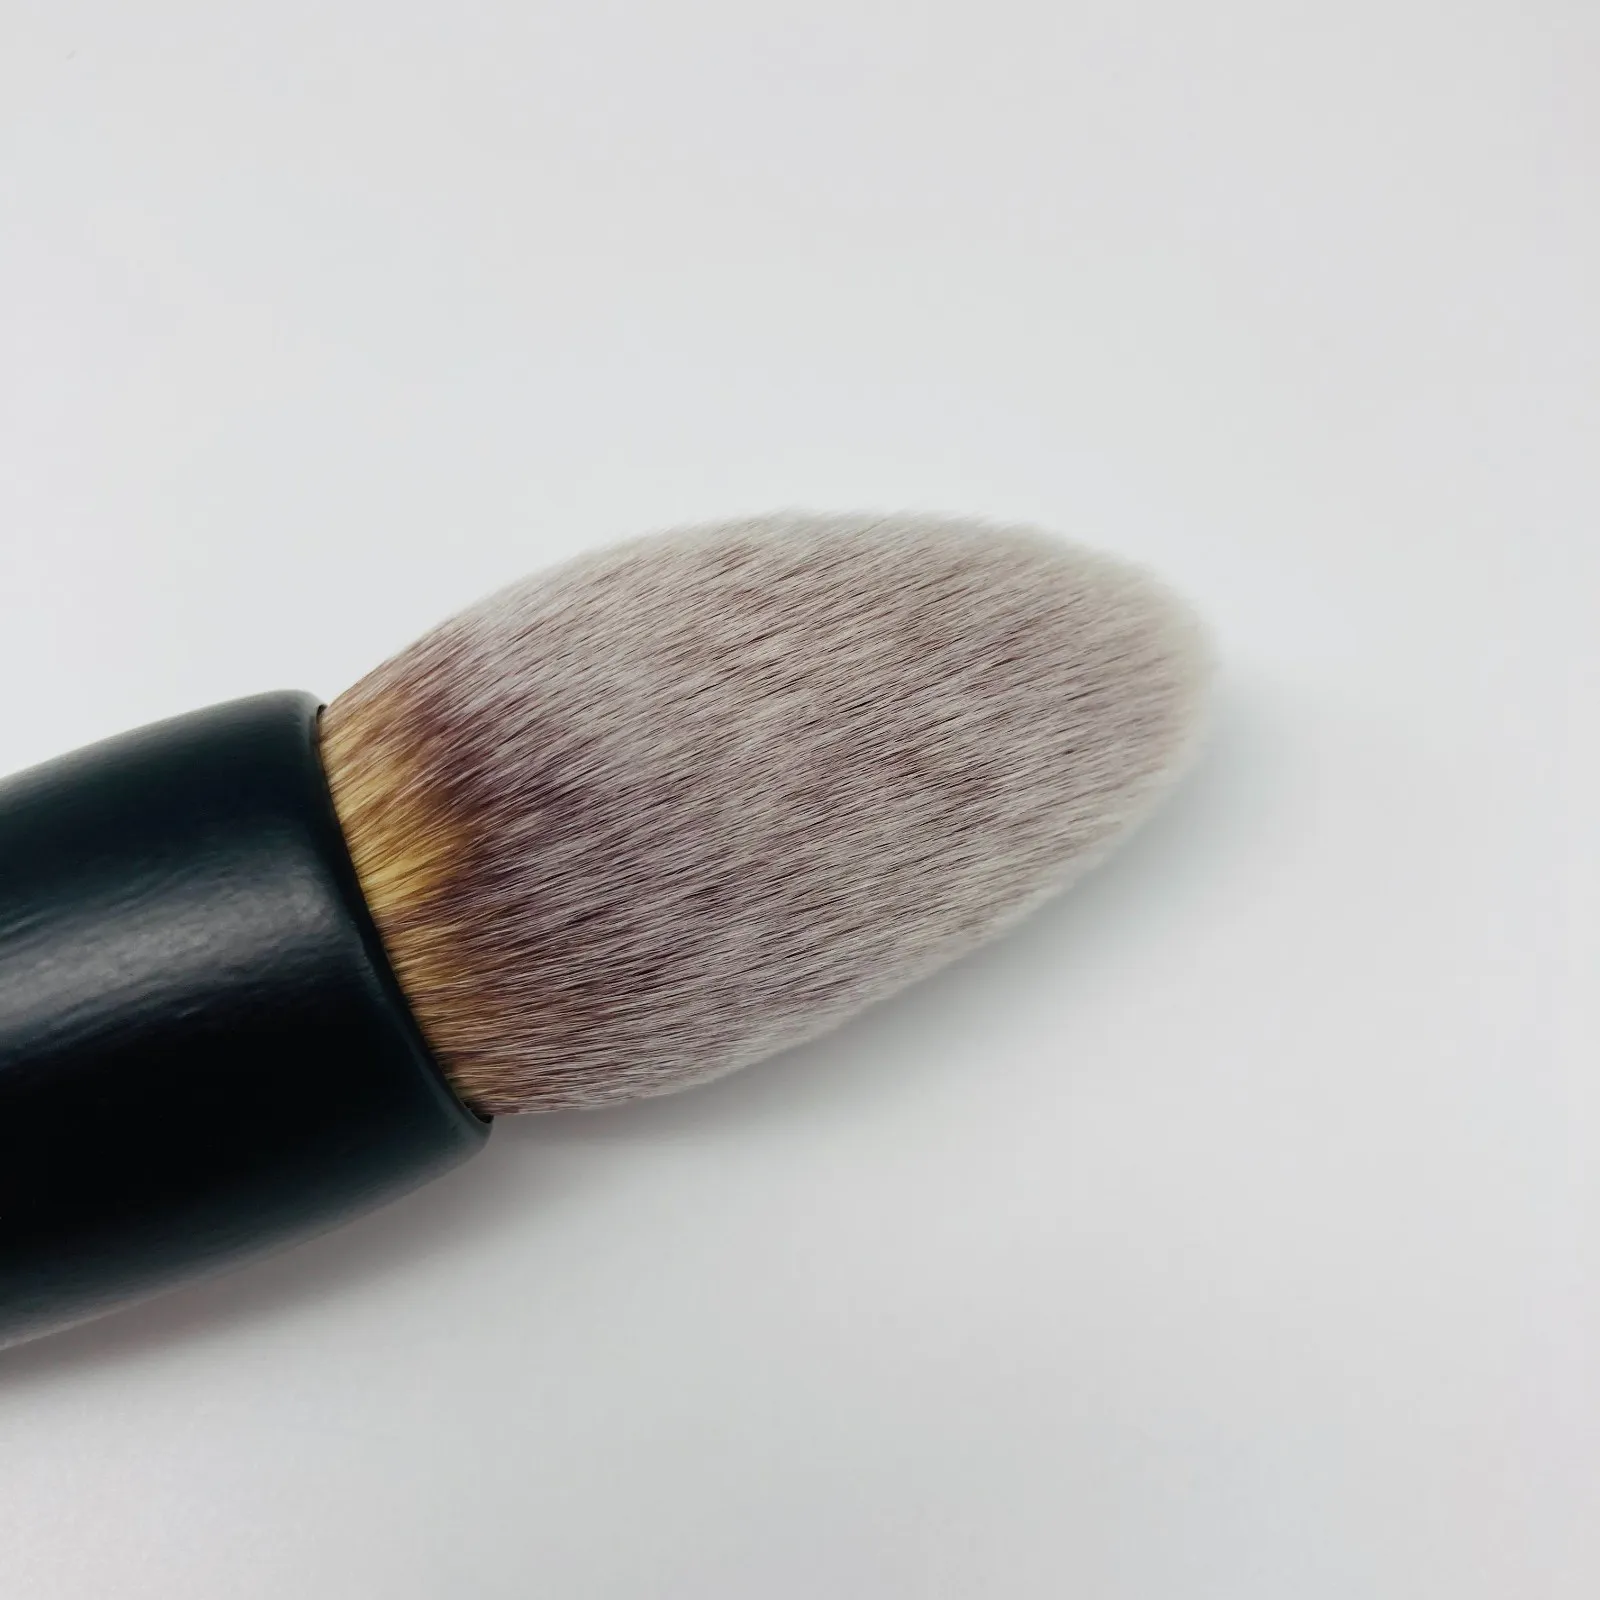 Suprabeauty full face makeup brushes from China for sale